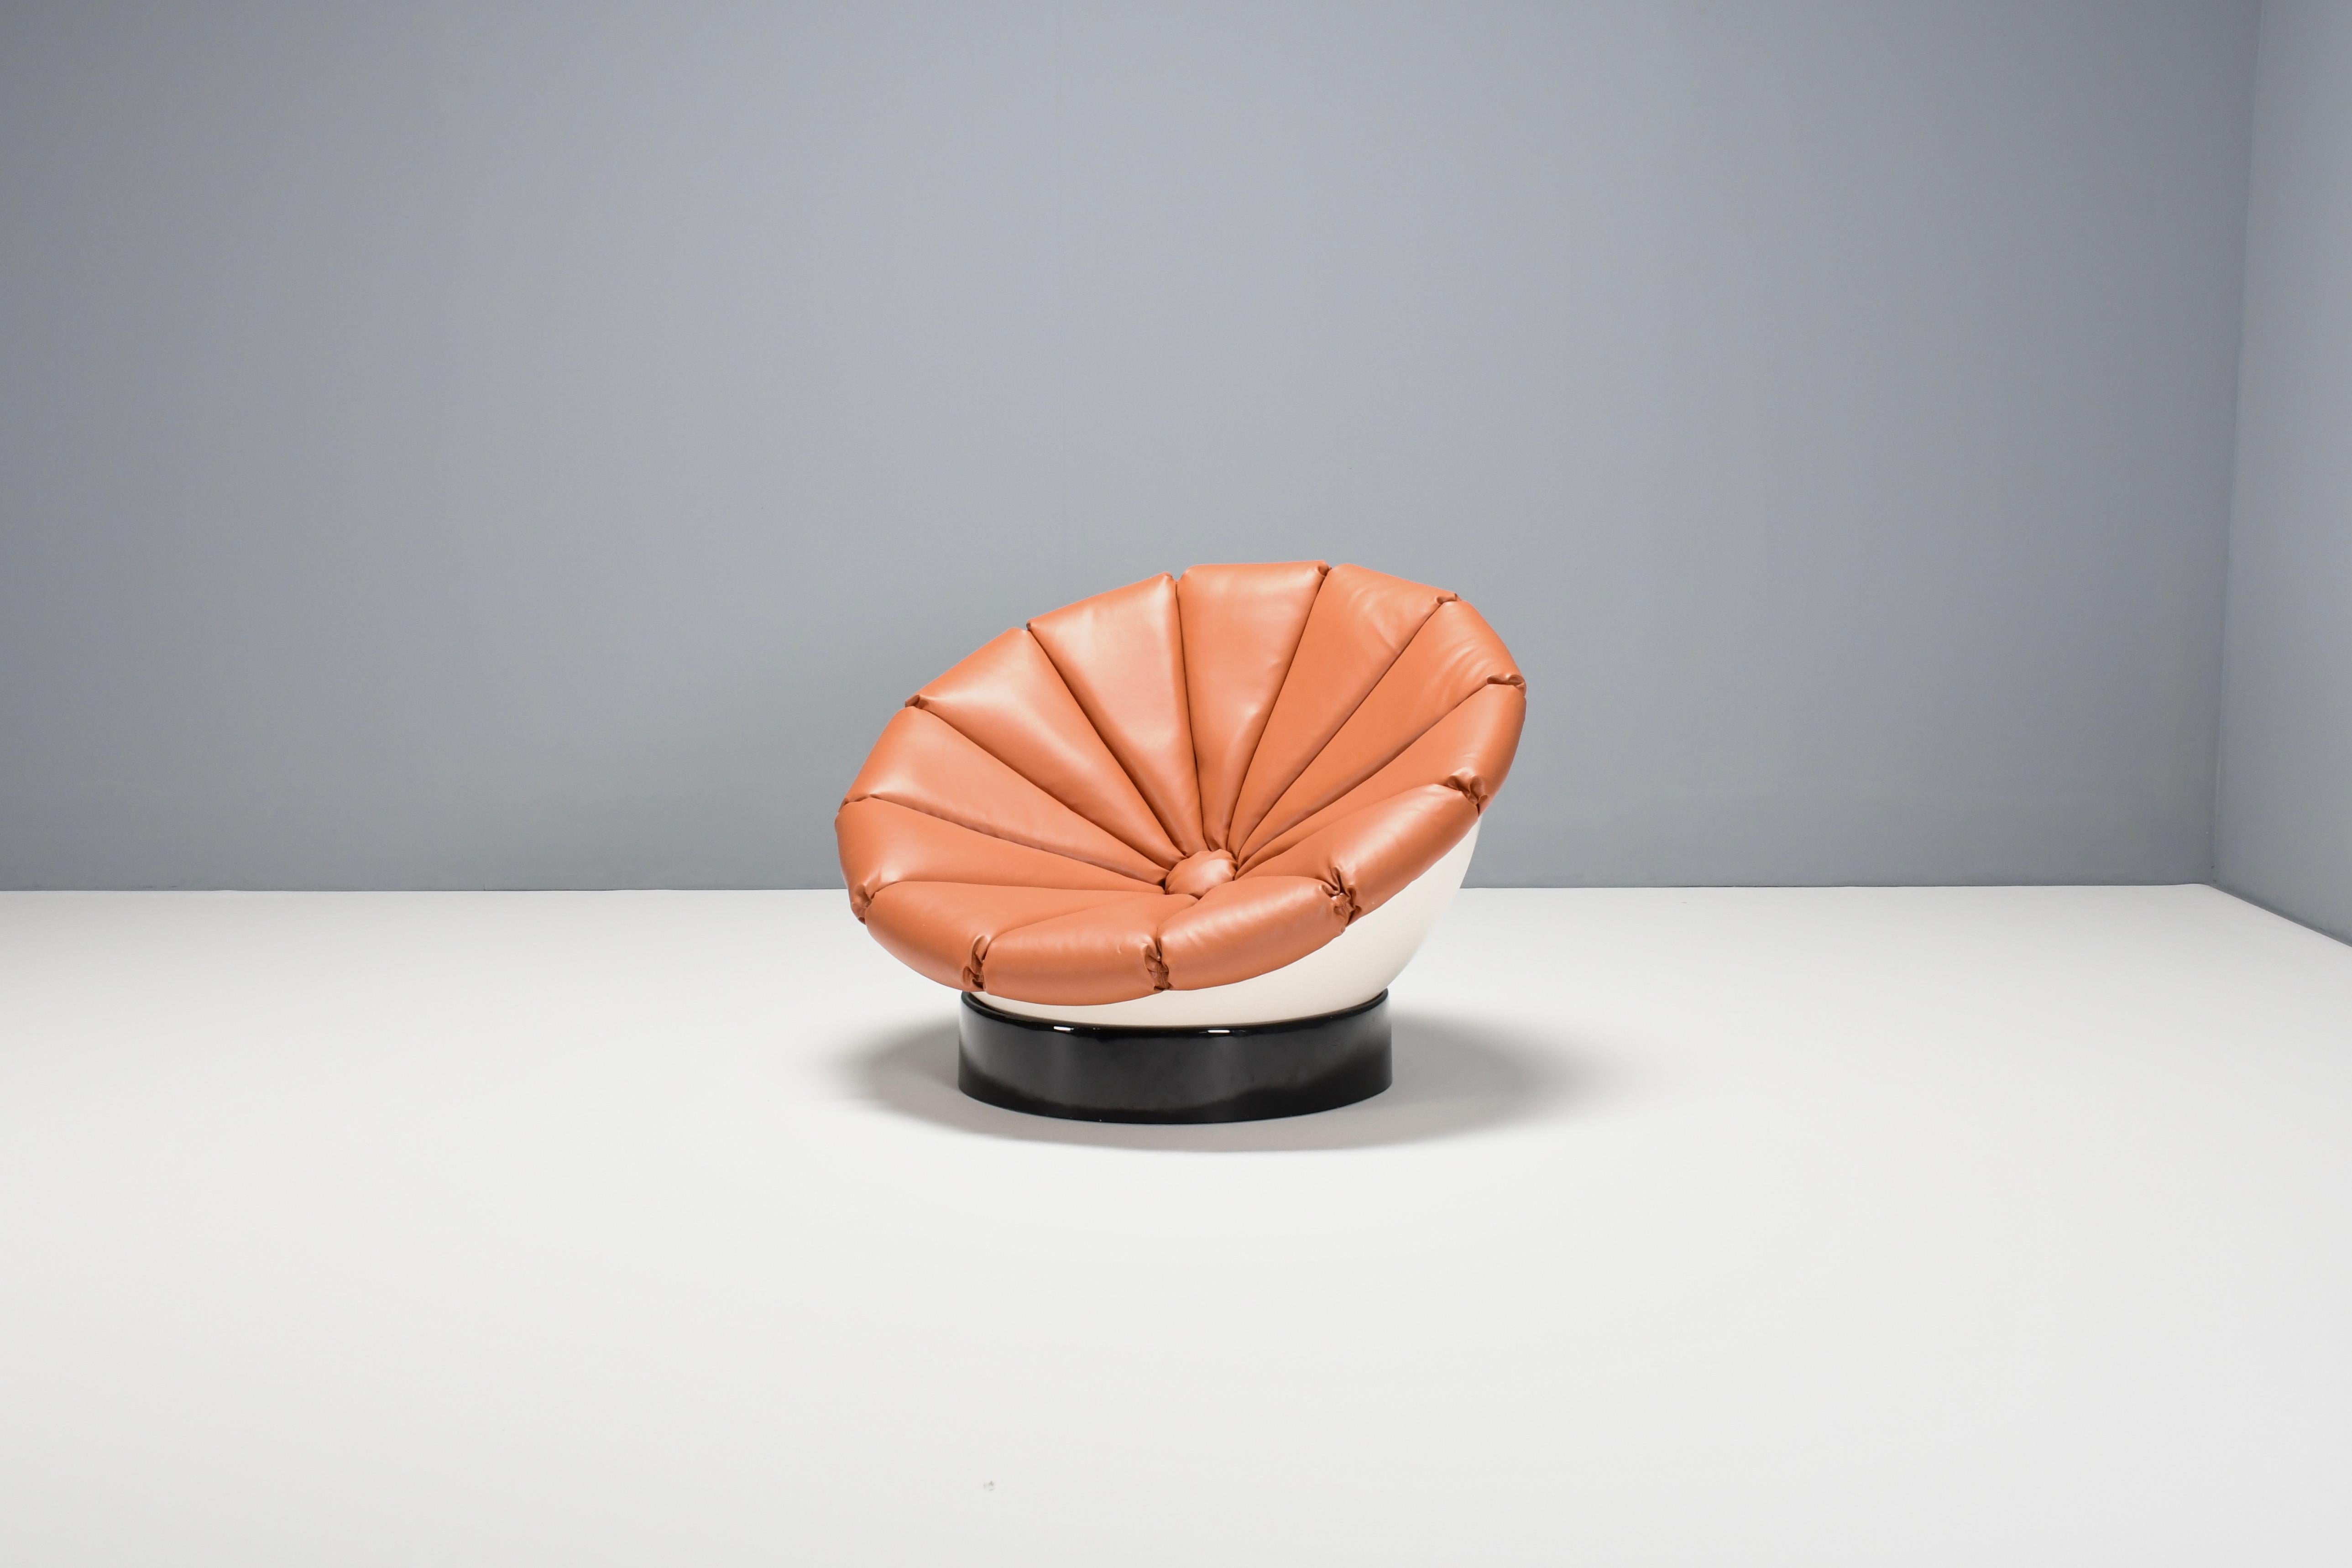 Beautiful Space Age ‘Girasole’ chair in excellent condition.

Designed by Luciano Frigerio in the 1960s 

The chair consists of a fiberglass half sphere which is lacquered white.

The sphere rests on a black lacquered fiberglass ring which enables